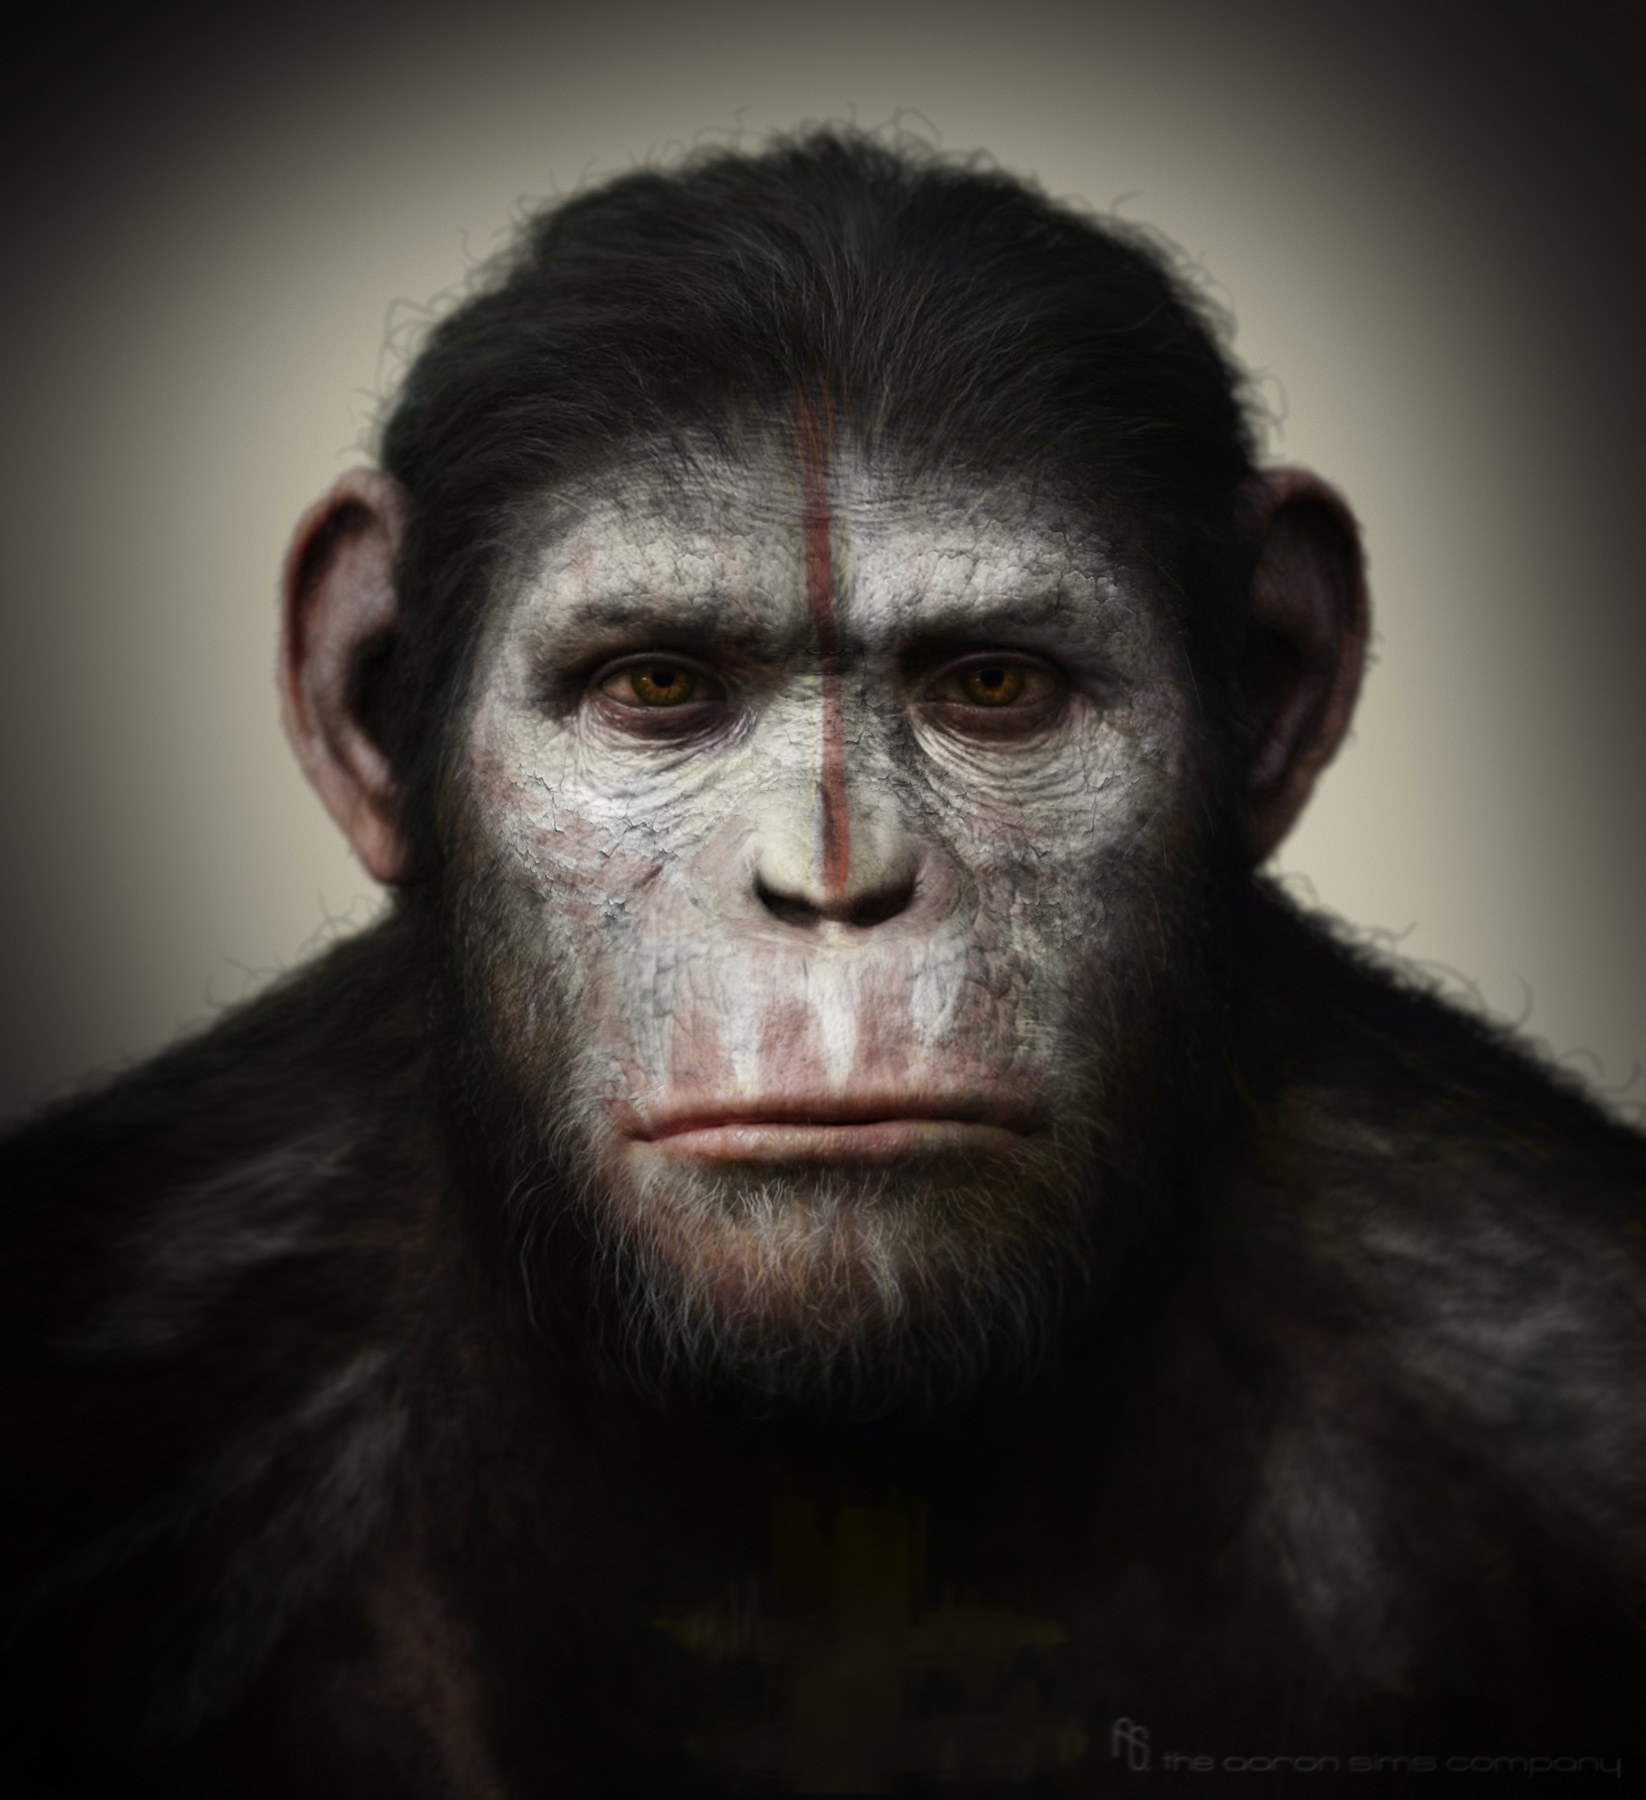 striking-concept-art-from-dawn-of-the-planet-of-the-apes11.jpg